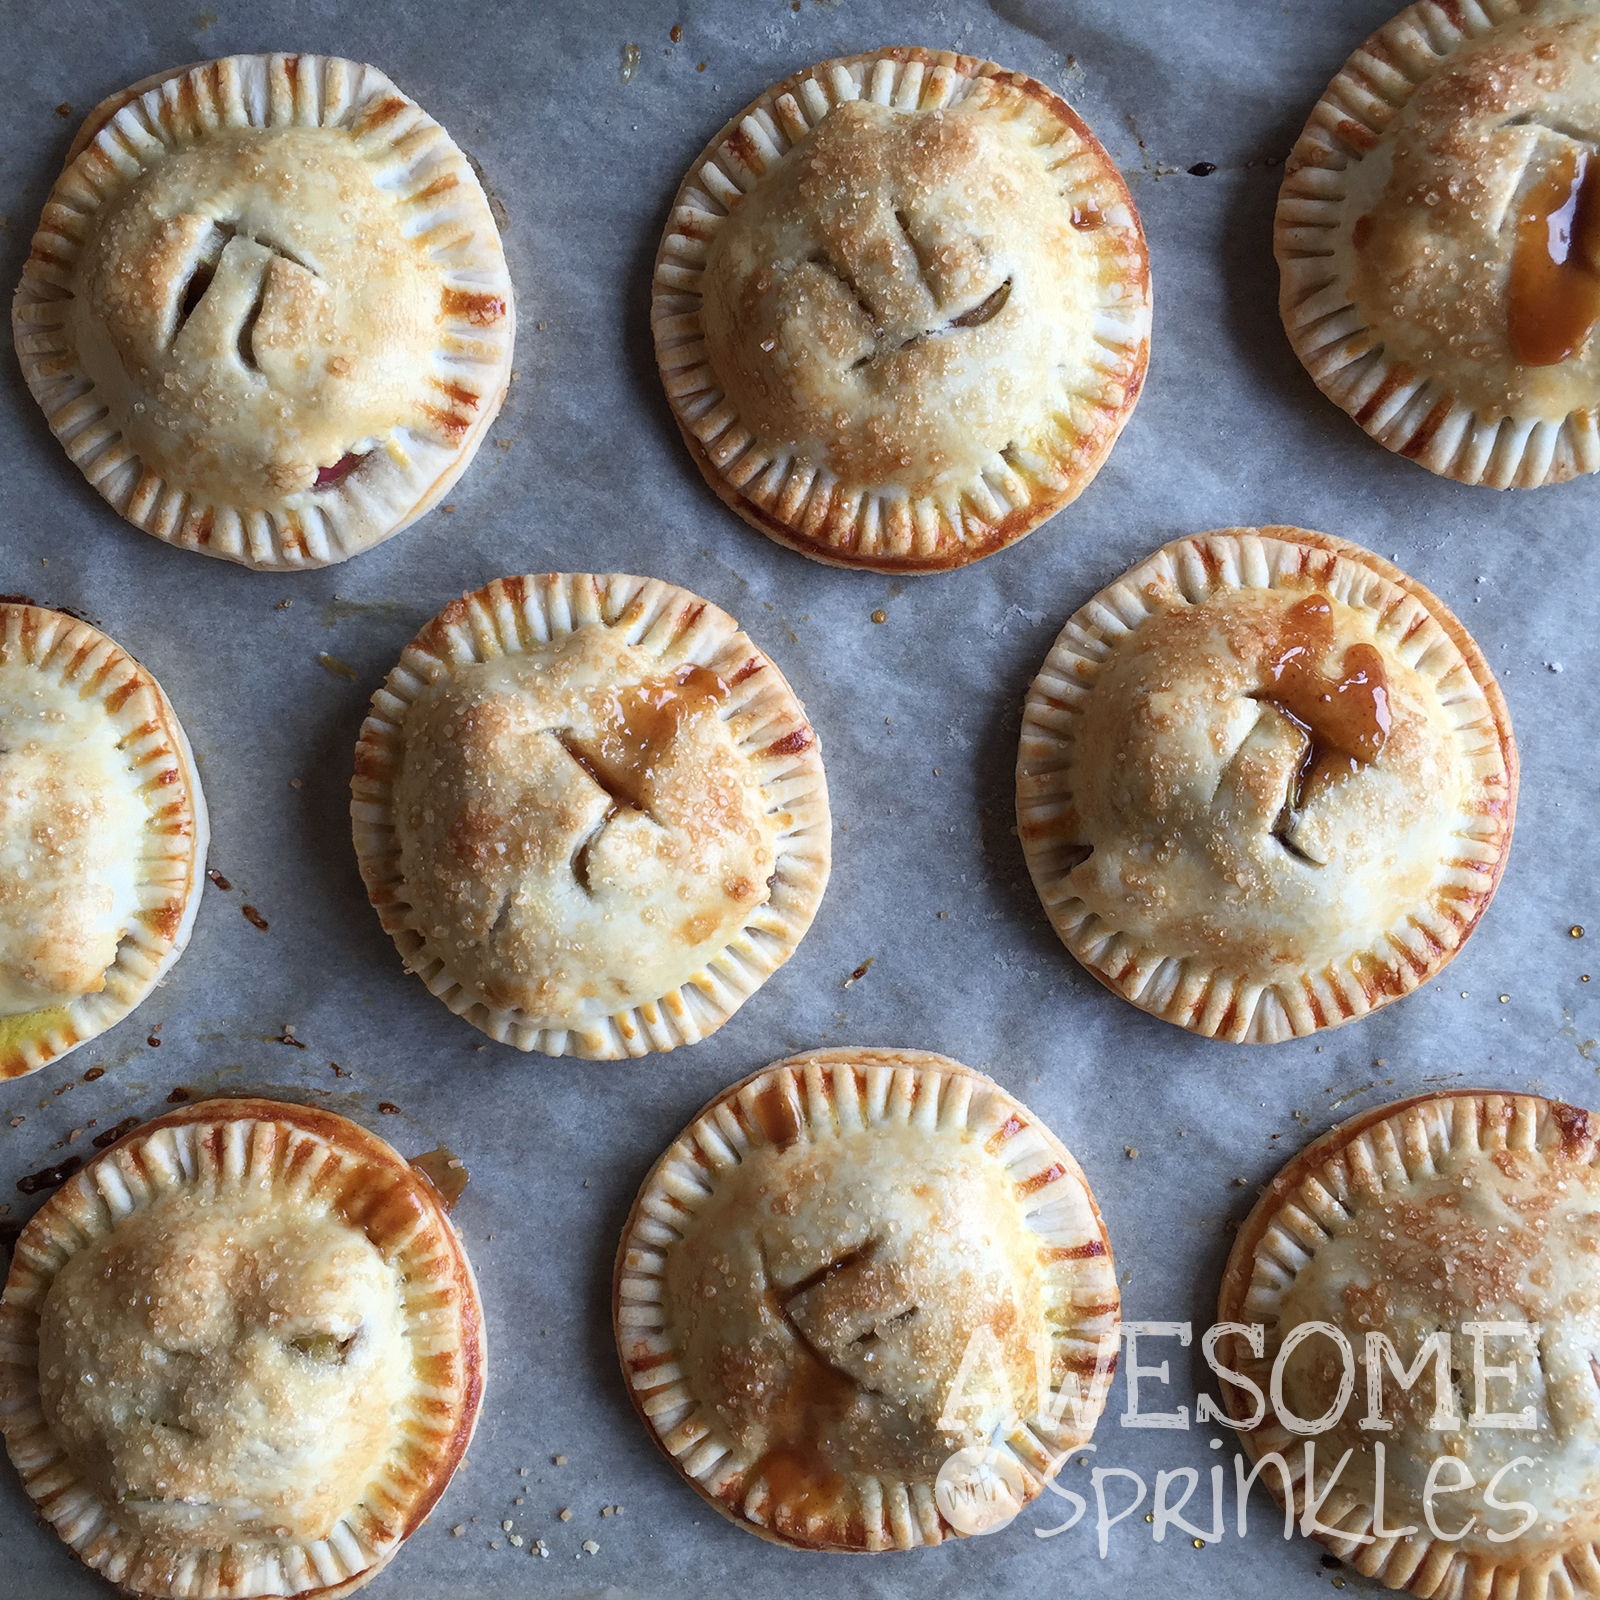 Boozy Apple Hand Pies | Awesome with Sprinkles